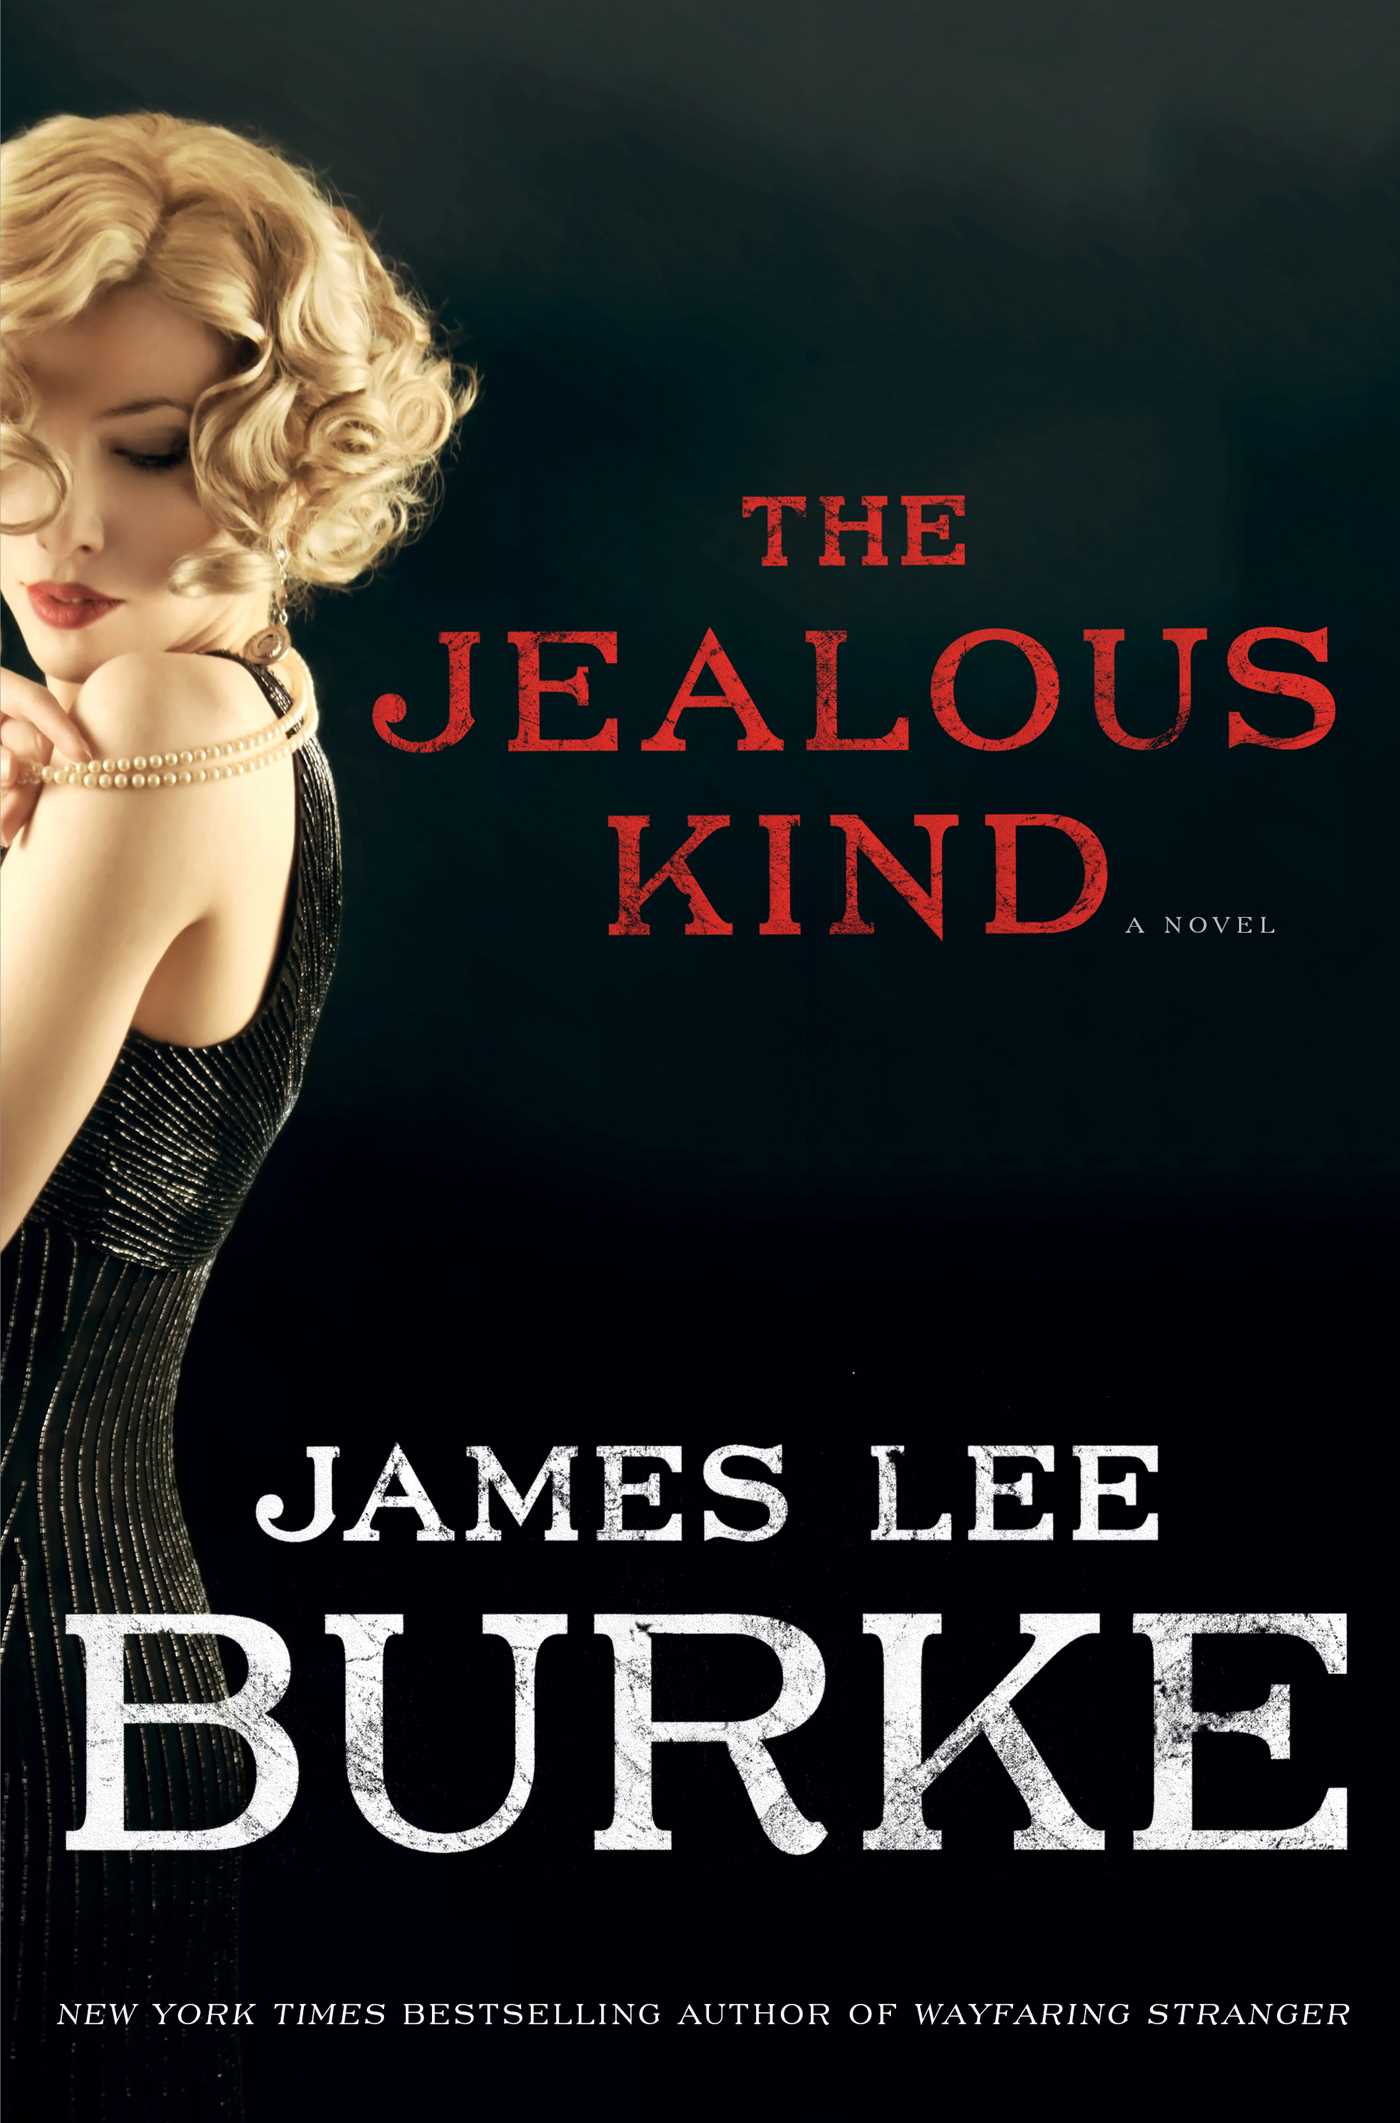 Book review: 'The Jealous Kind' by James Lee Burke